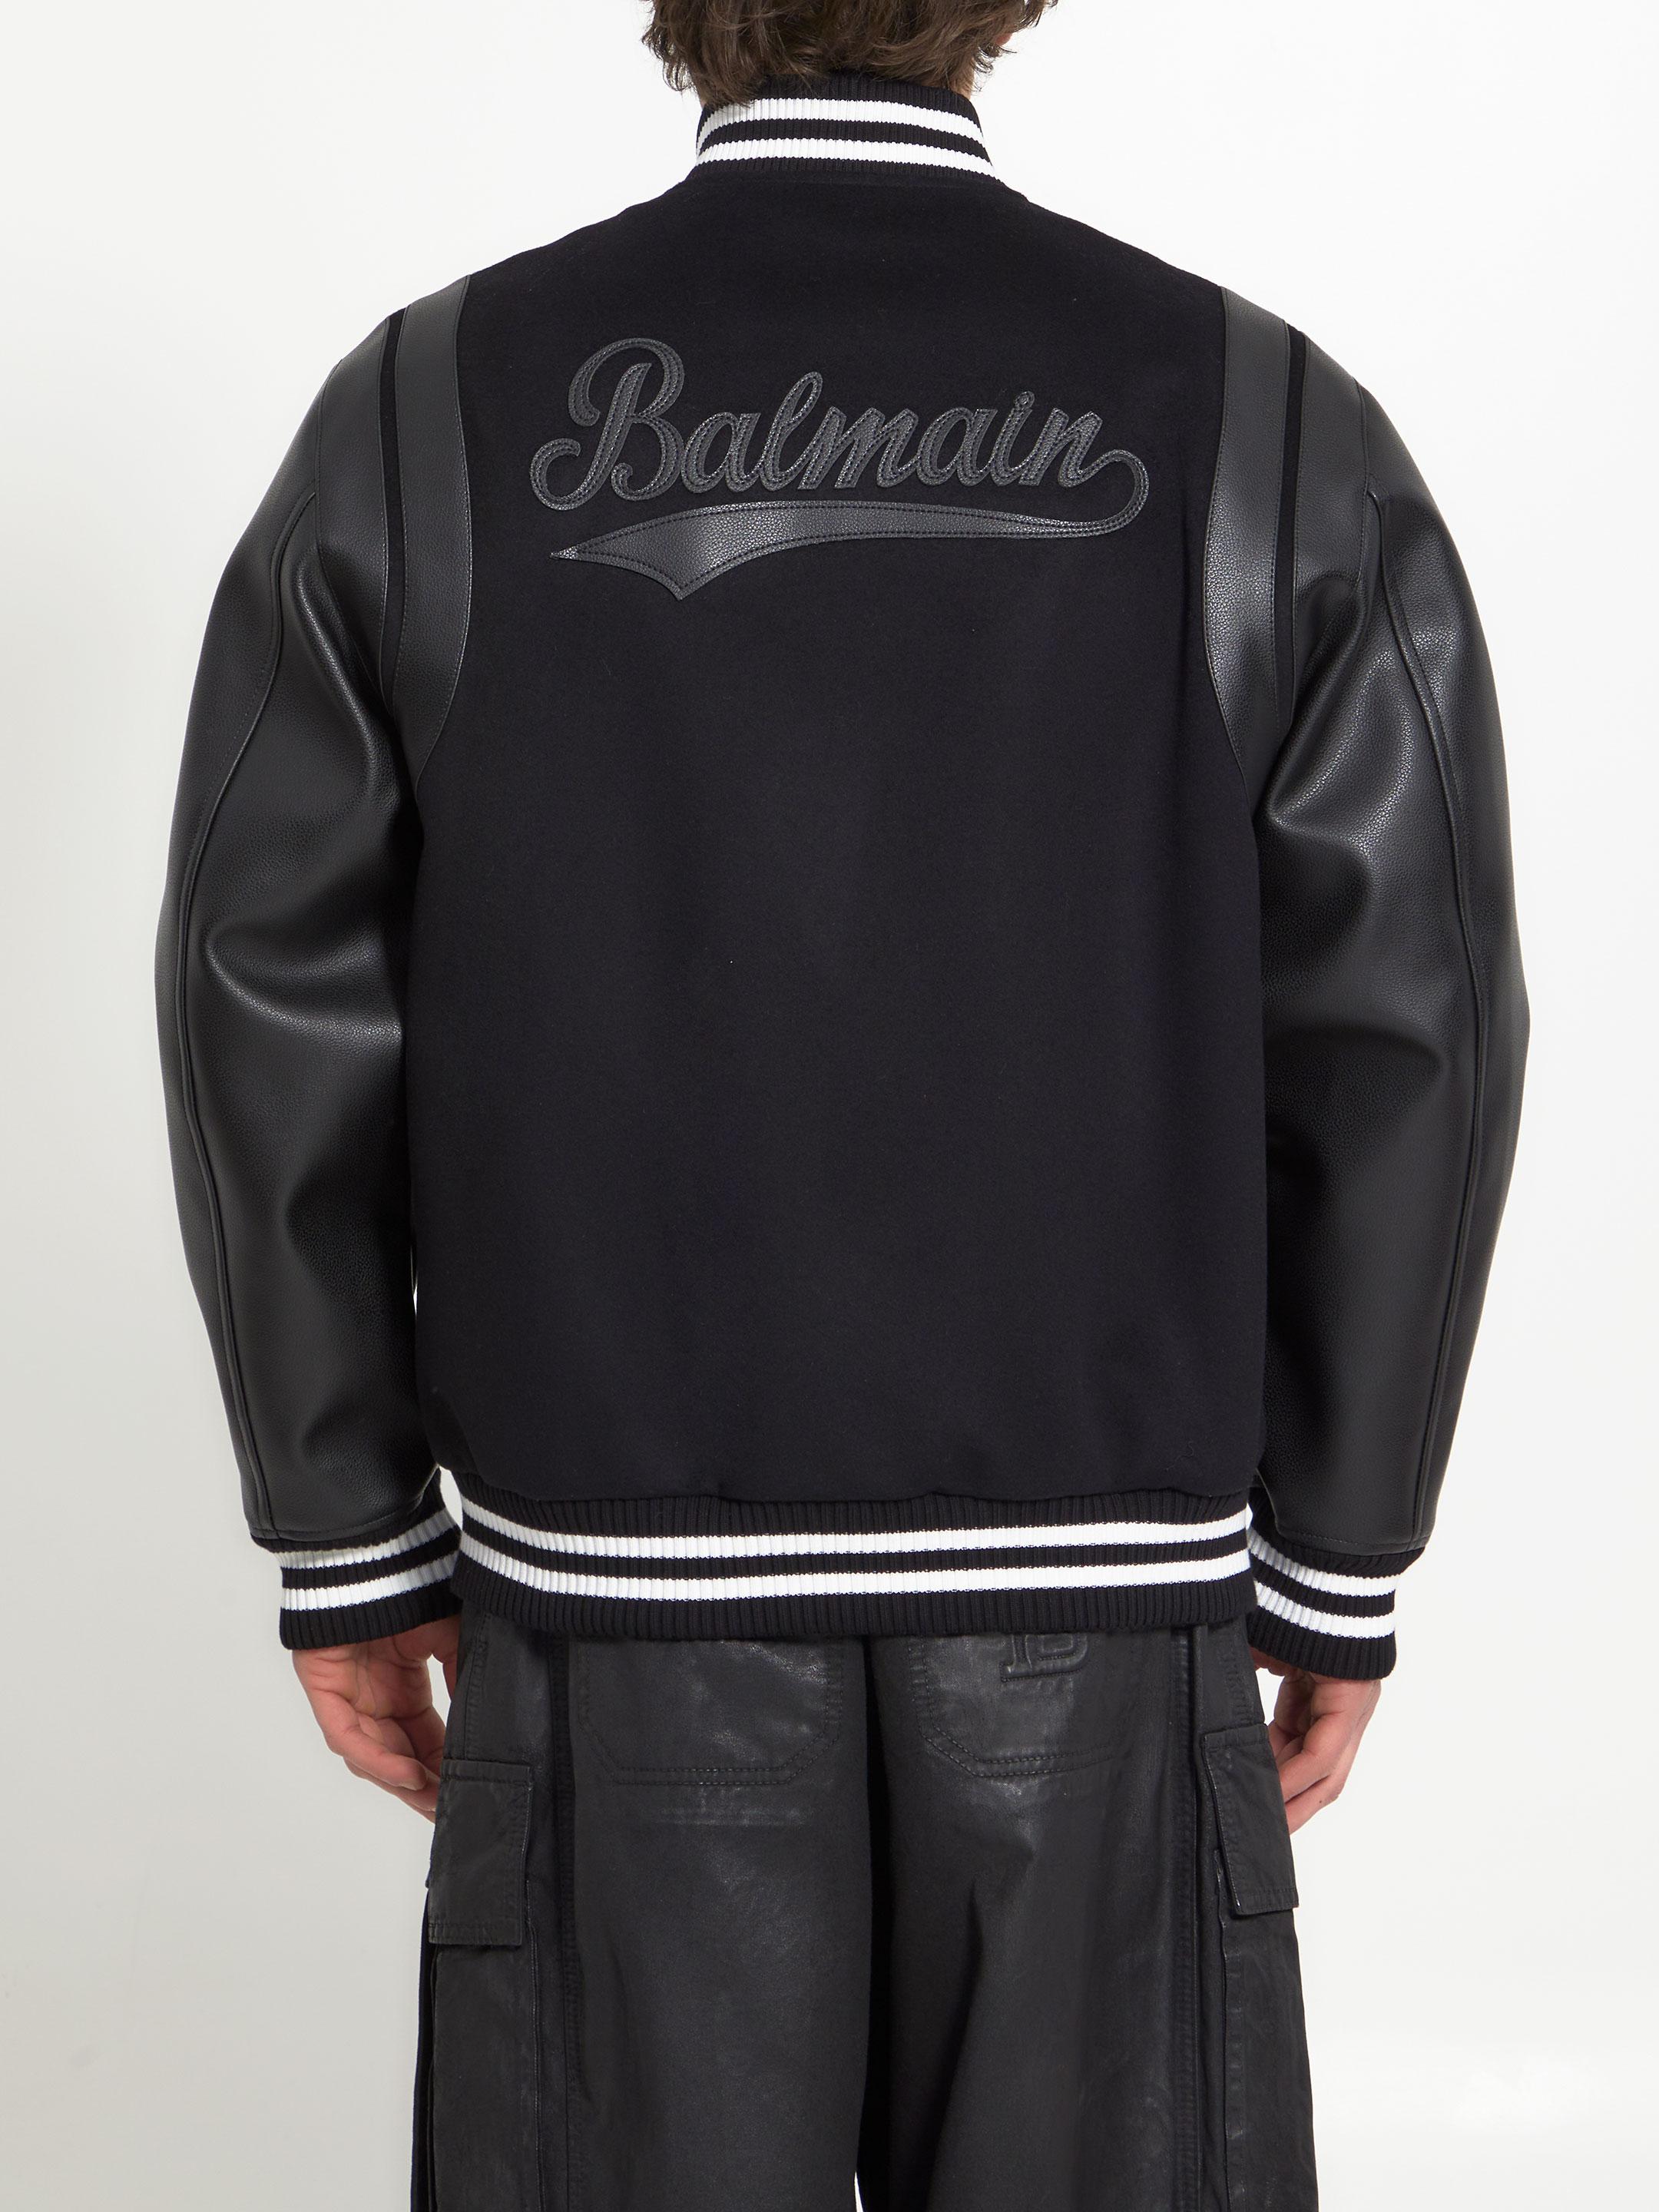 Balmain Wool And Leather Teddy Bomber Jacket in Black for Men | Lyst